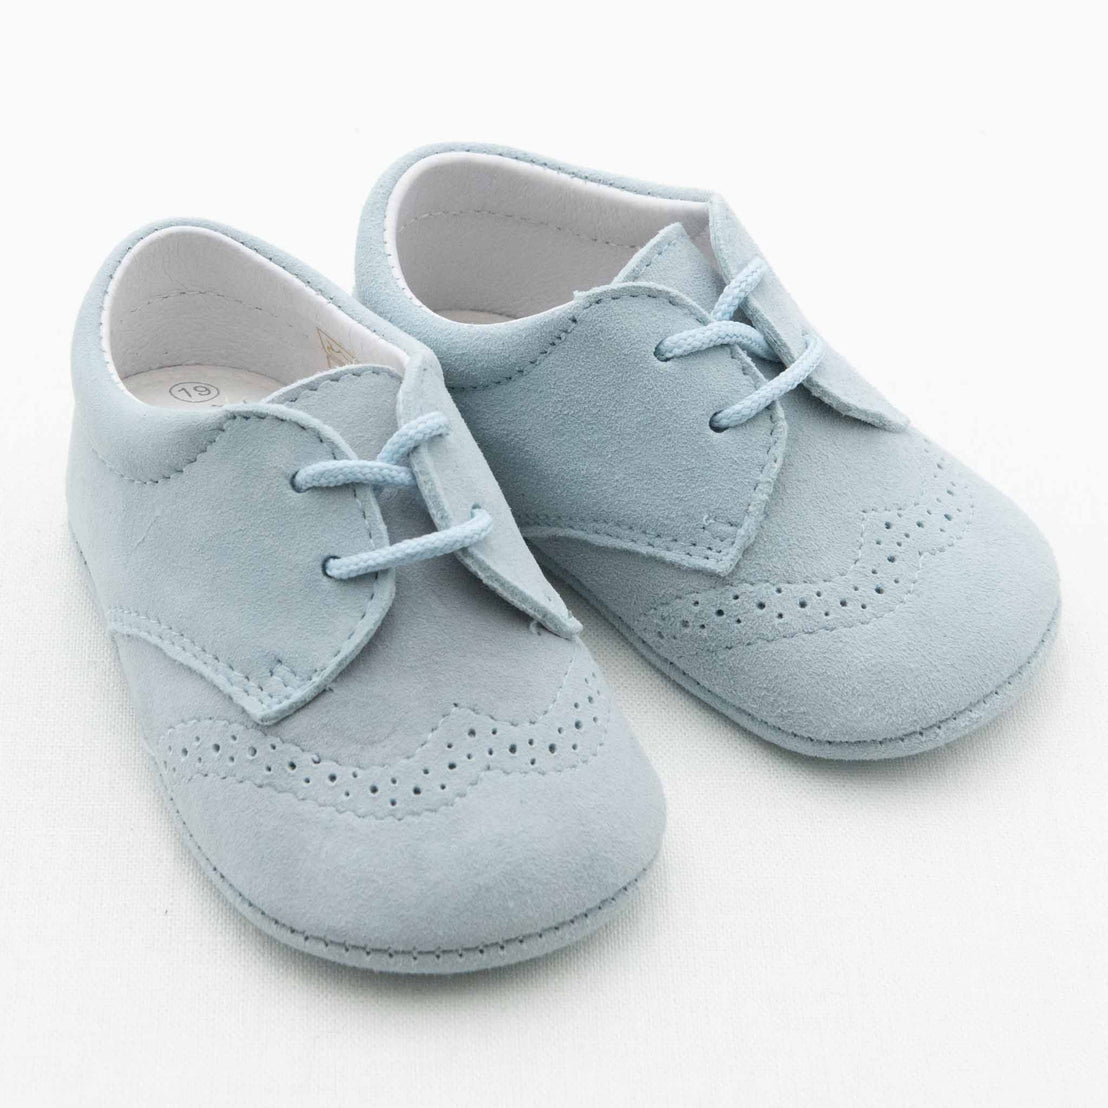 A pair of light blue Harrison Suede Shoes designed for baby boys, featuring handmade suede material with laces and decorative perforations reminiscent of brogue detailing. The shoes are positioned side by side on a plain white background.